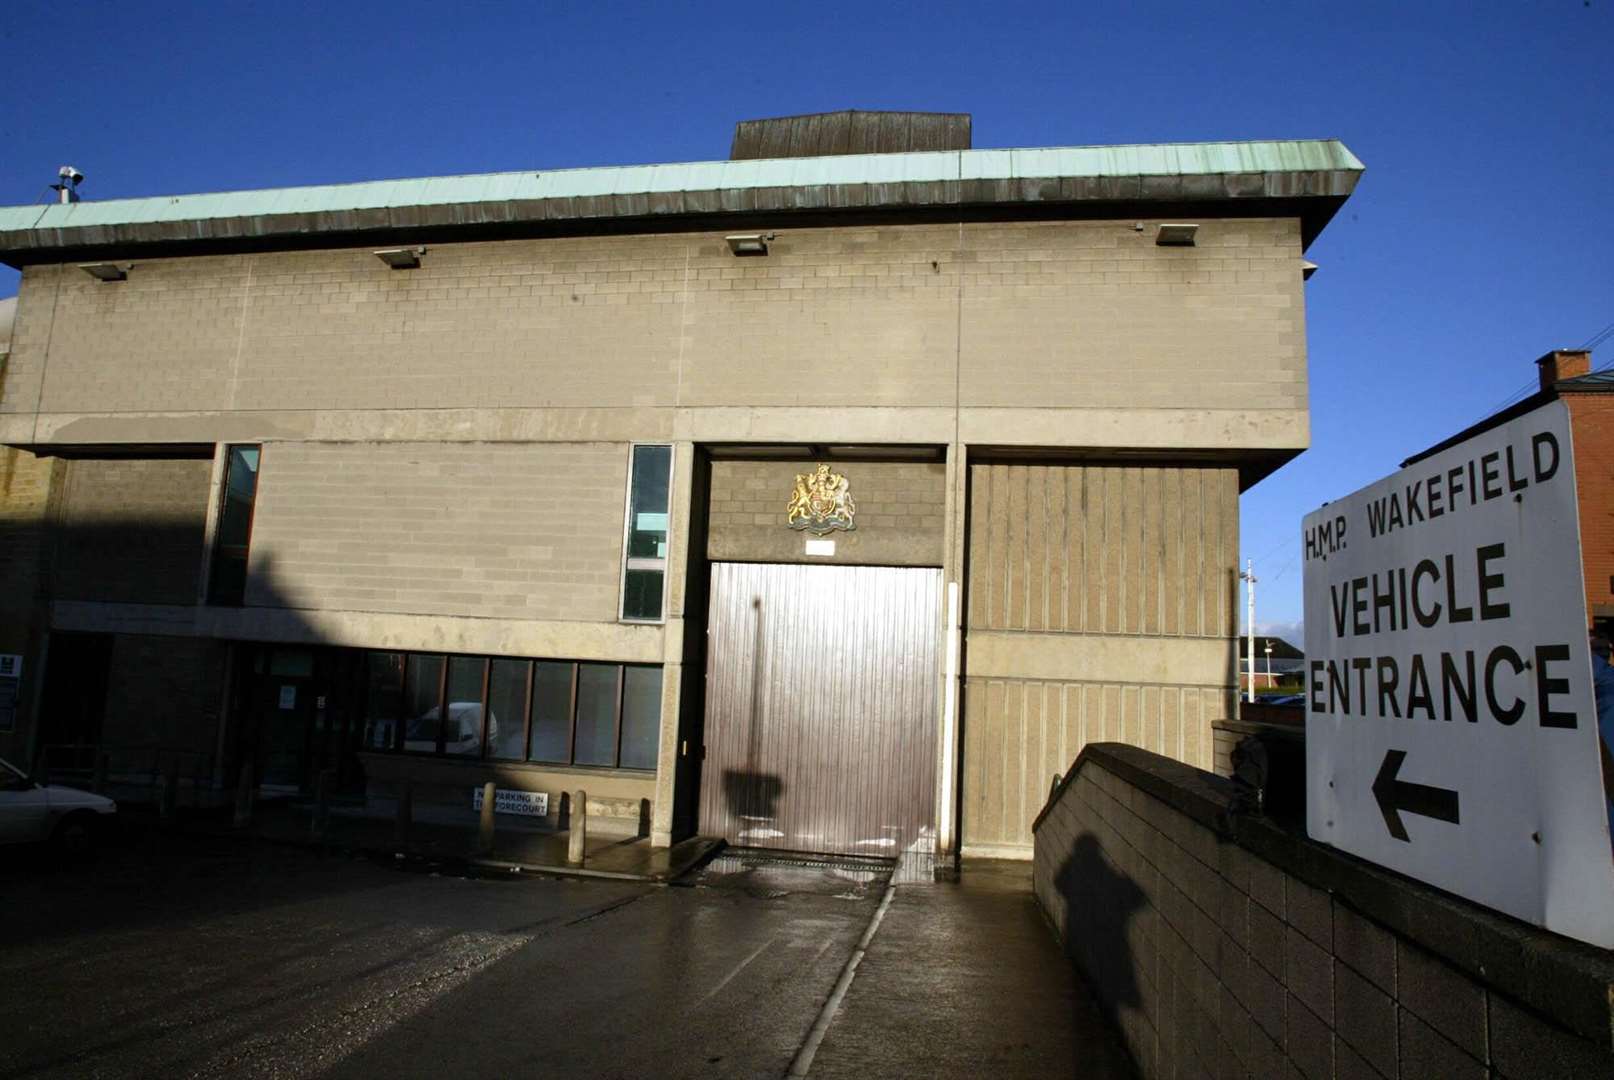 The incident happened at HMP Wakefield where Roy Whiting is currently serving a life sentence (Gareth Copley/PA)